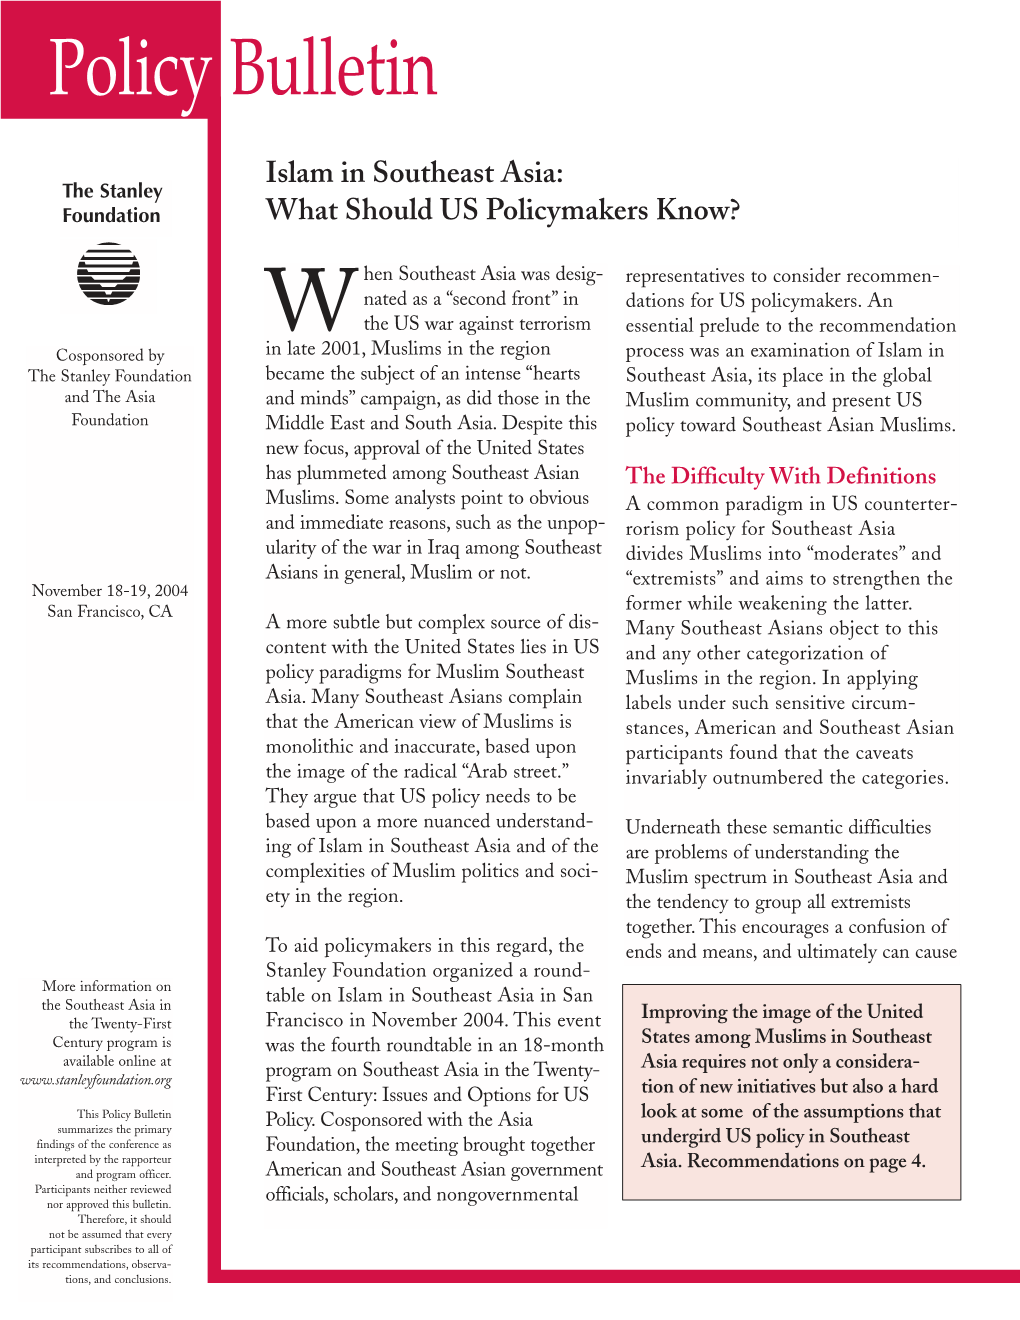 Islam in Southeast Asia: Foundation What Should US Policymakers Know?